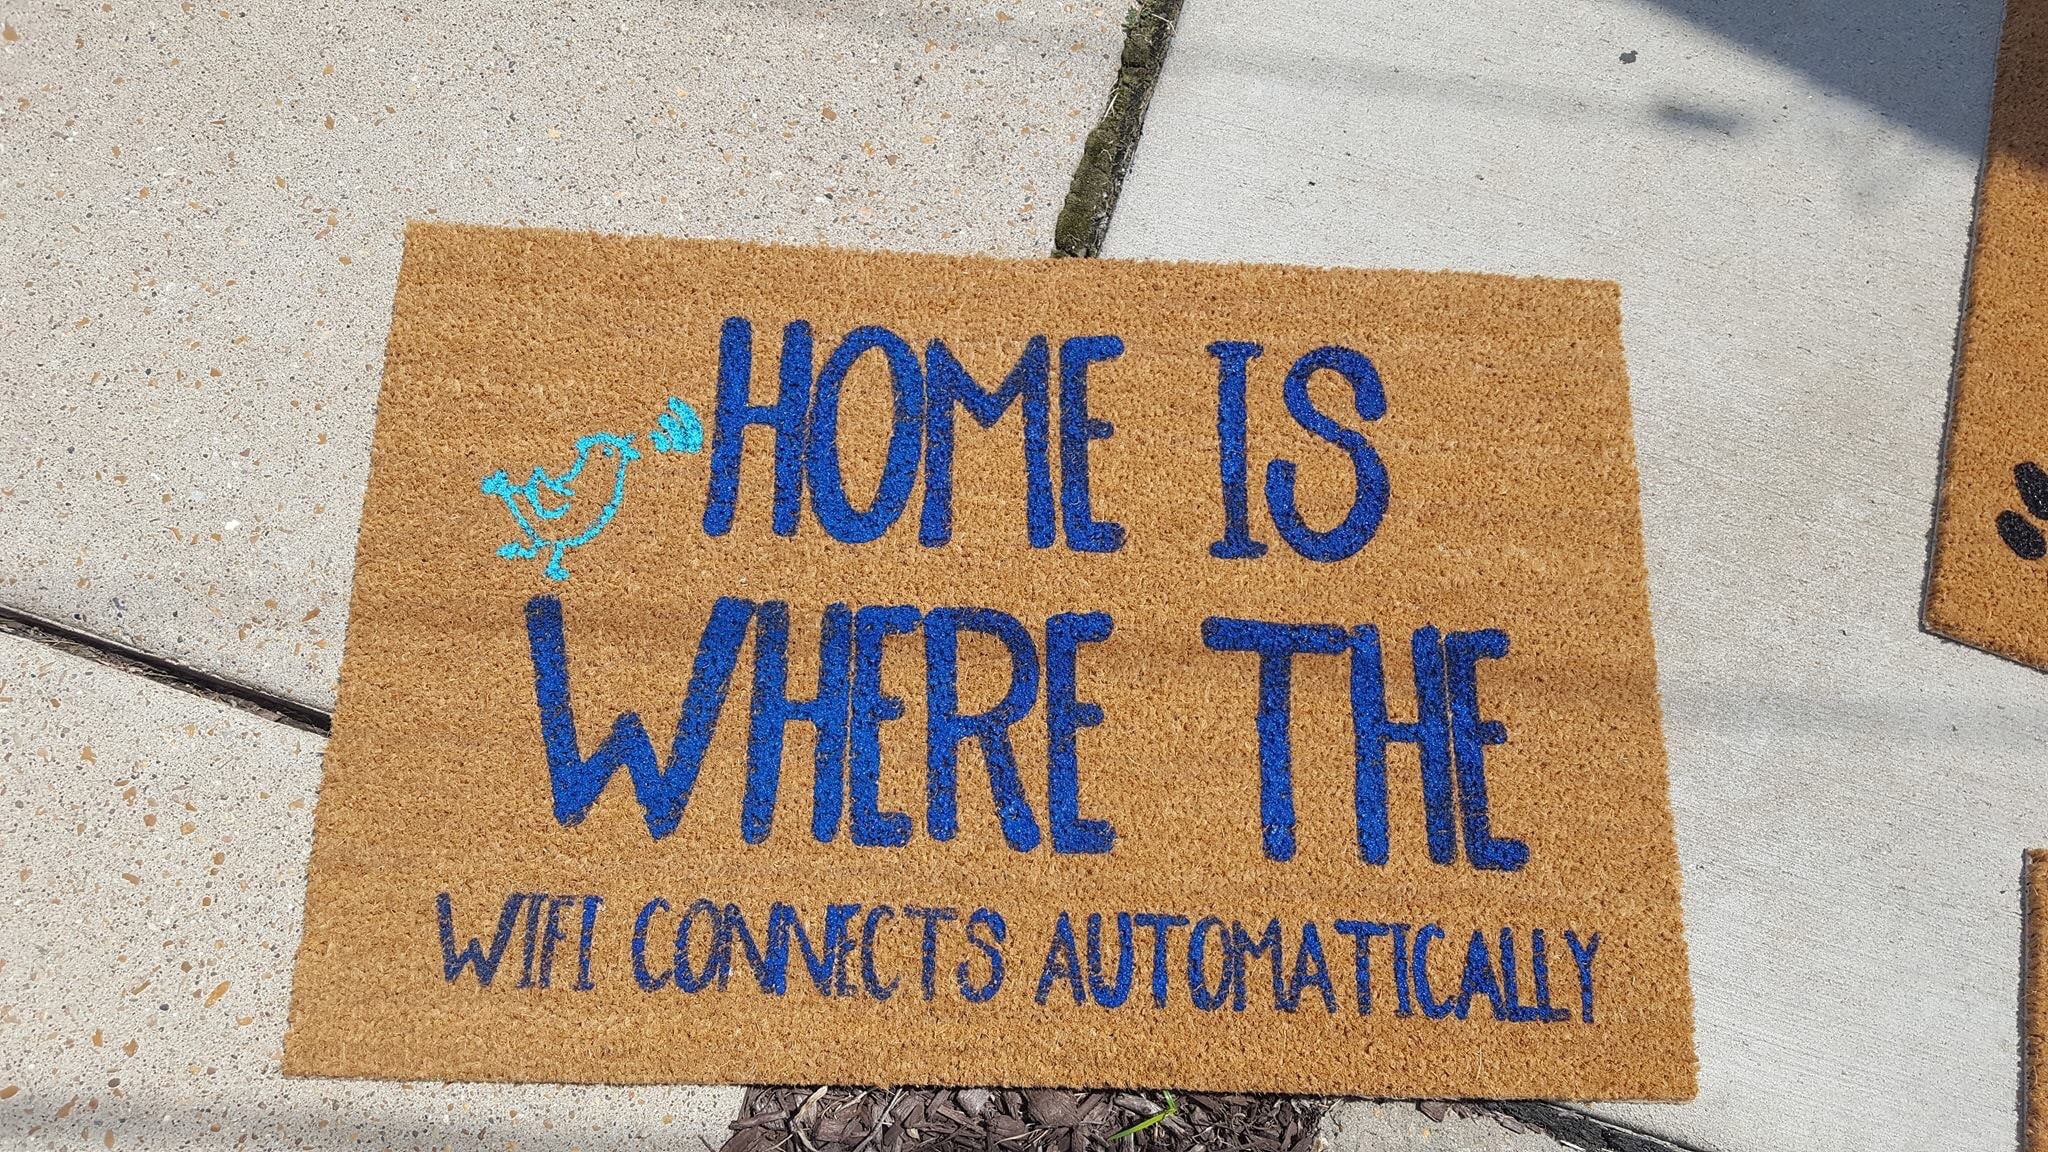 Home is where the Wifi connects automatically